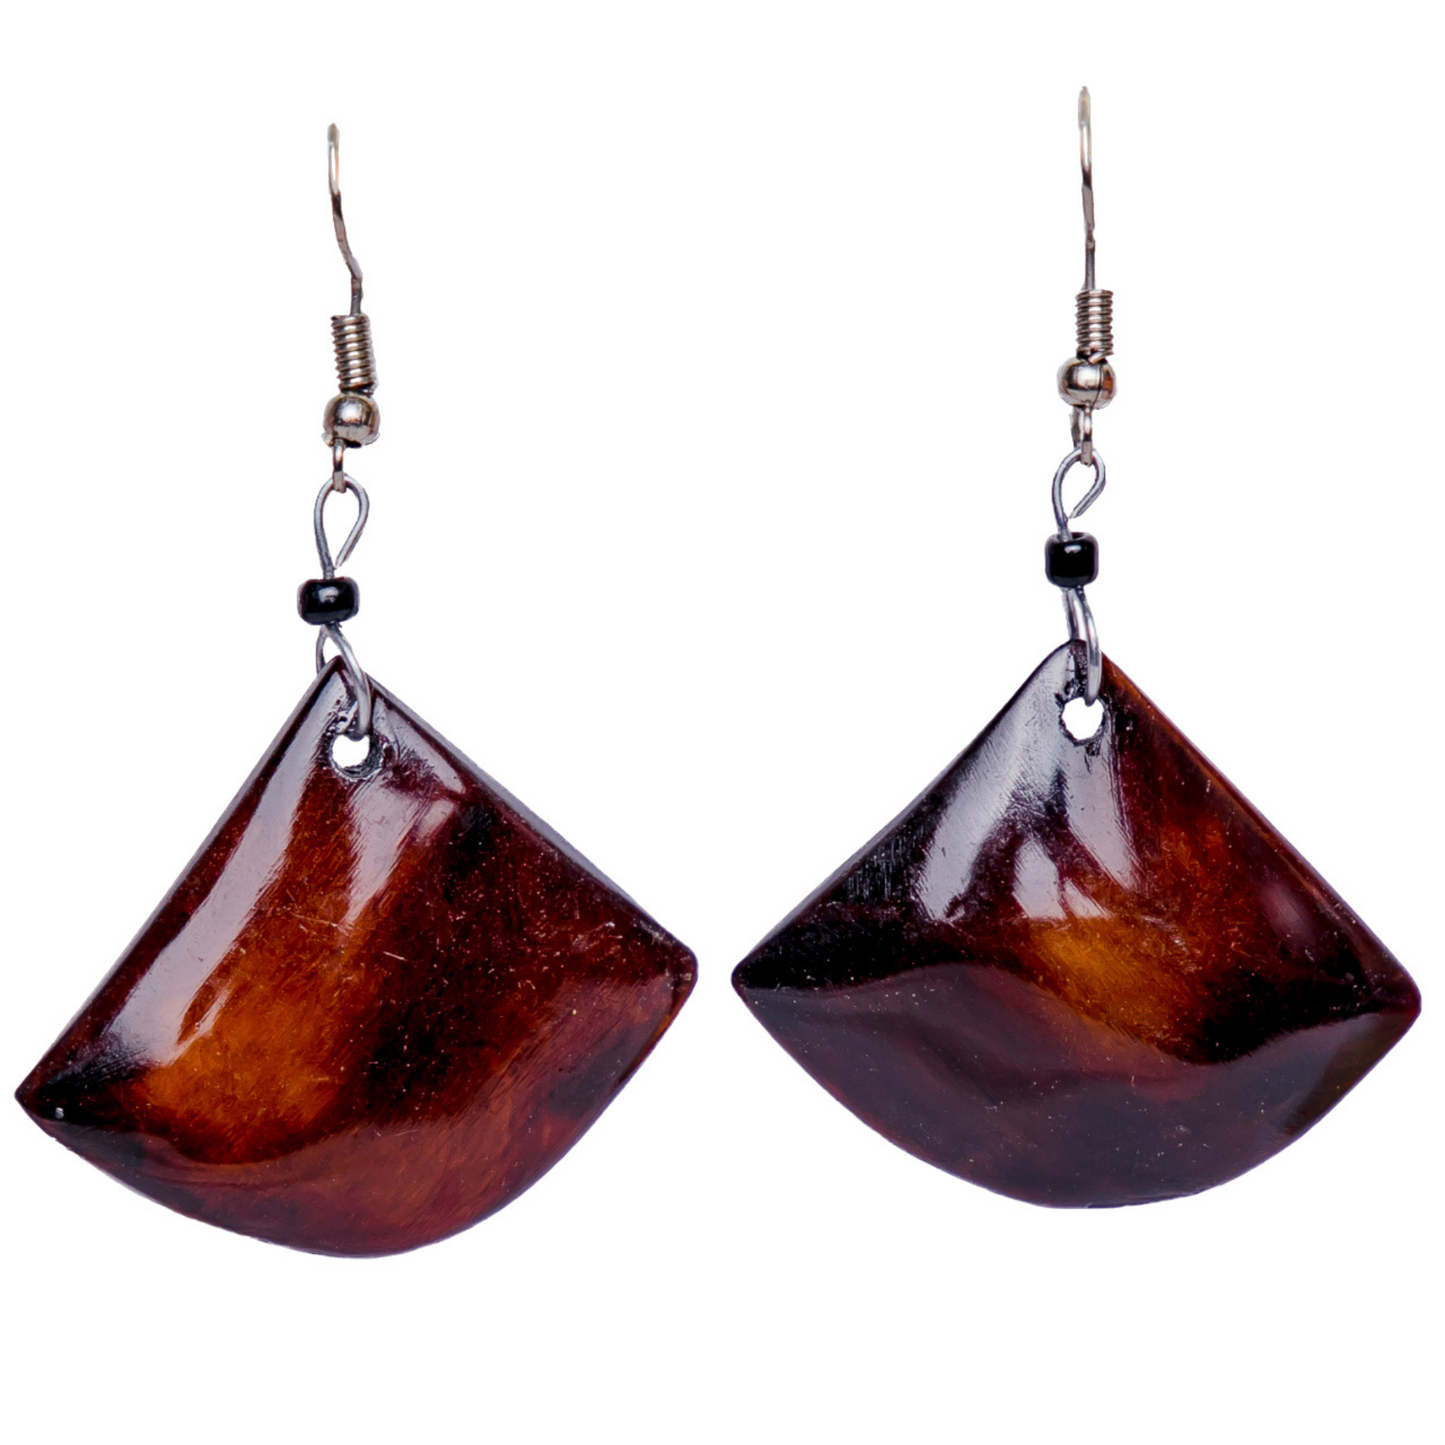 Brown and black small dangle earrings